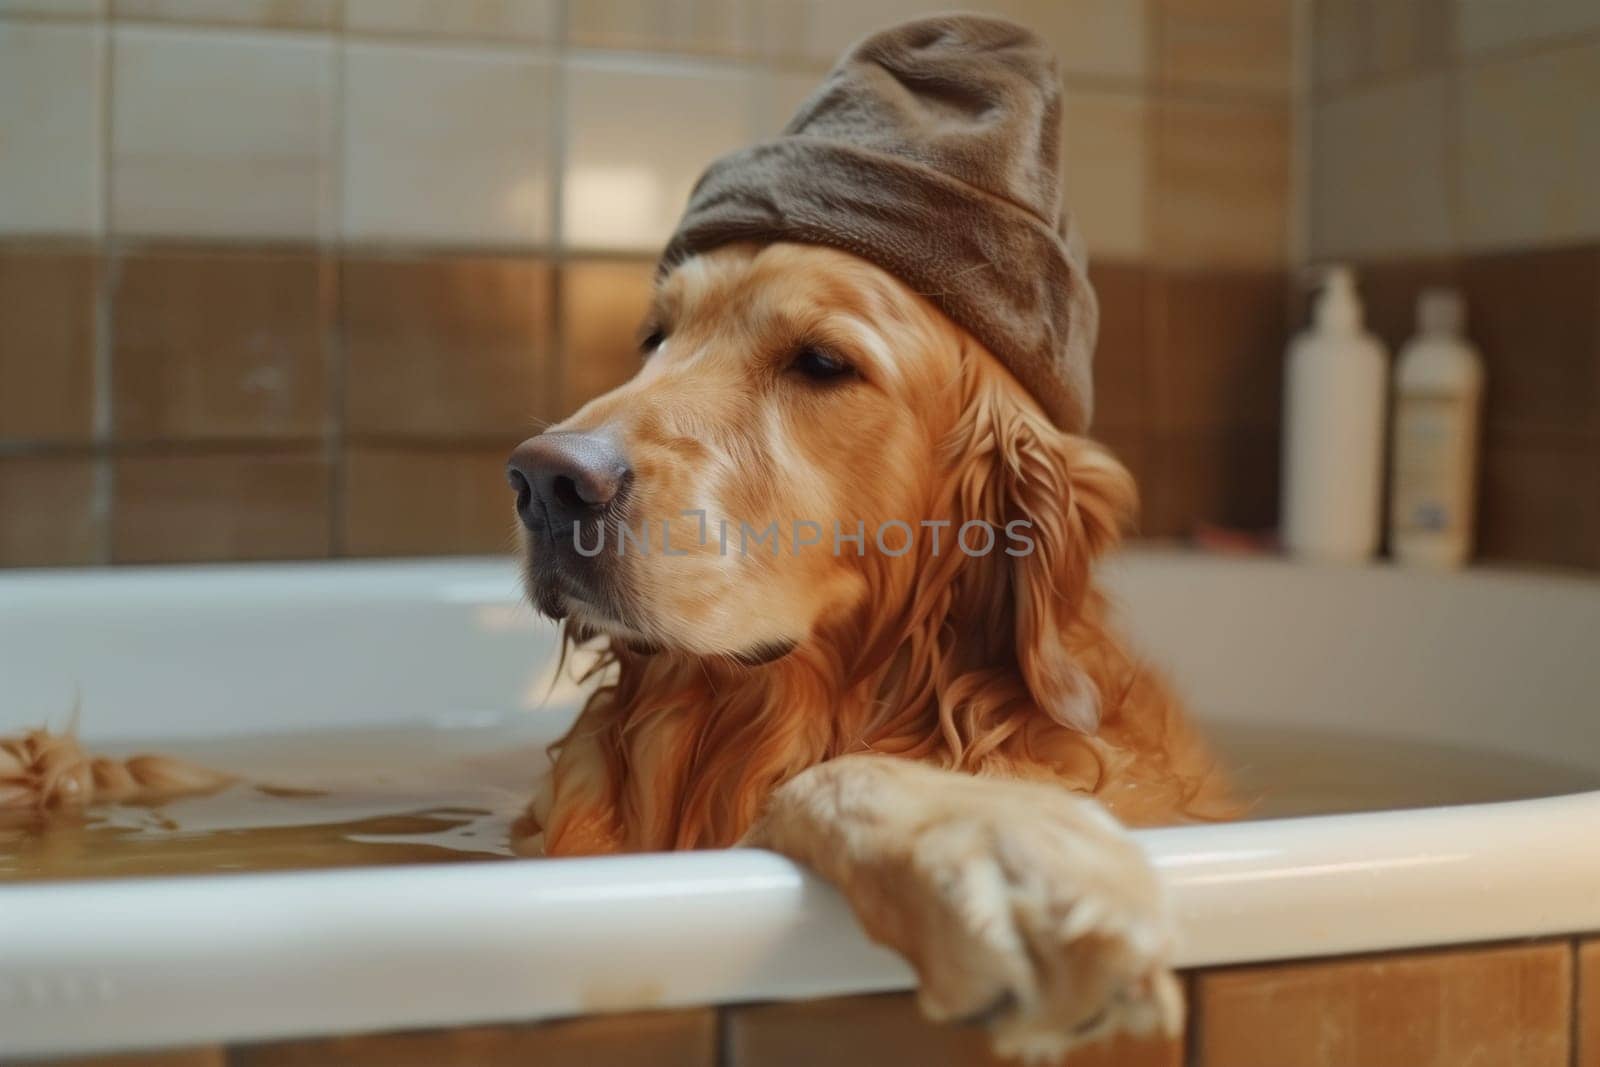 Dog in Bathtub With Towel on Head by Sd28DimoN_1976